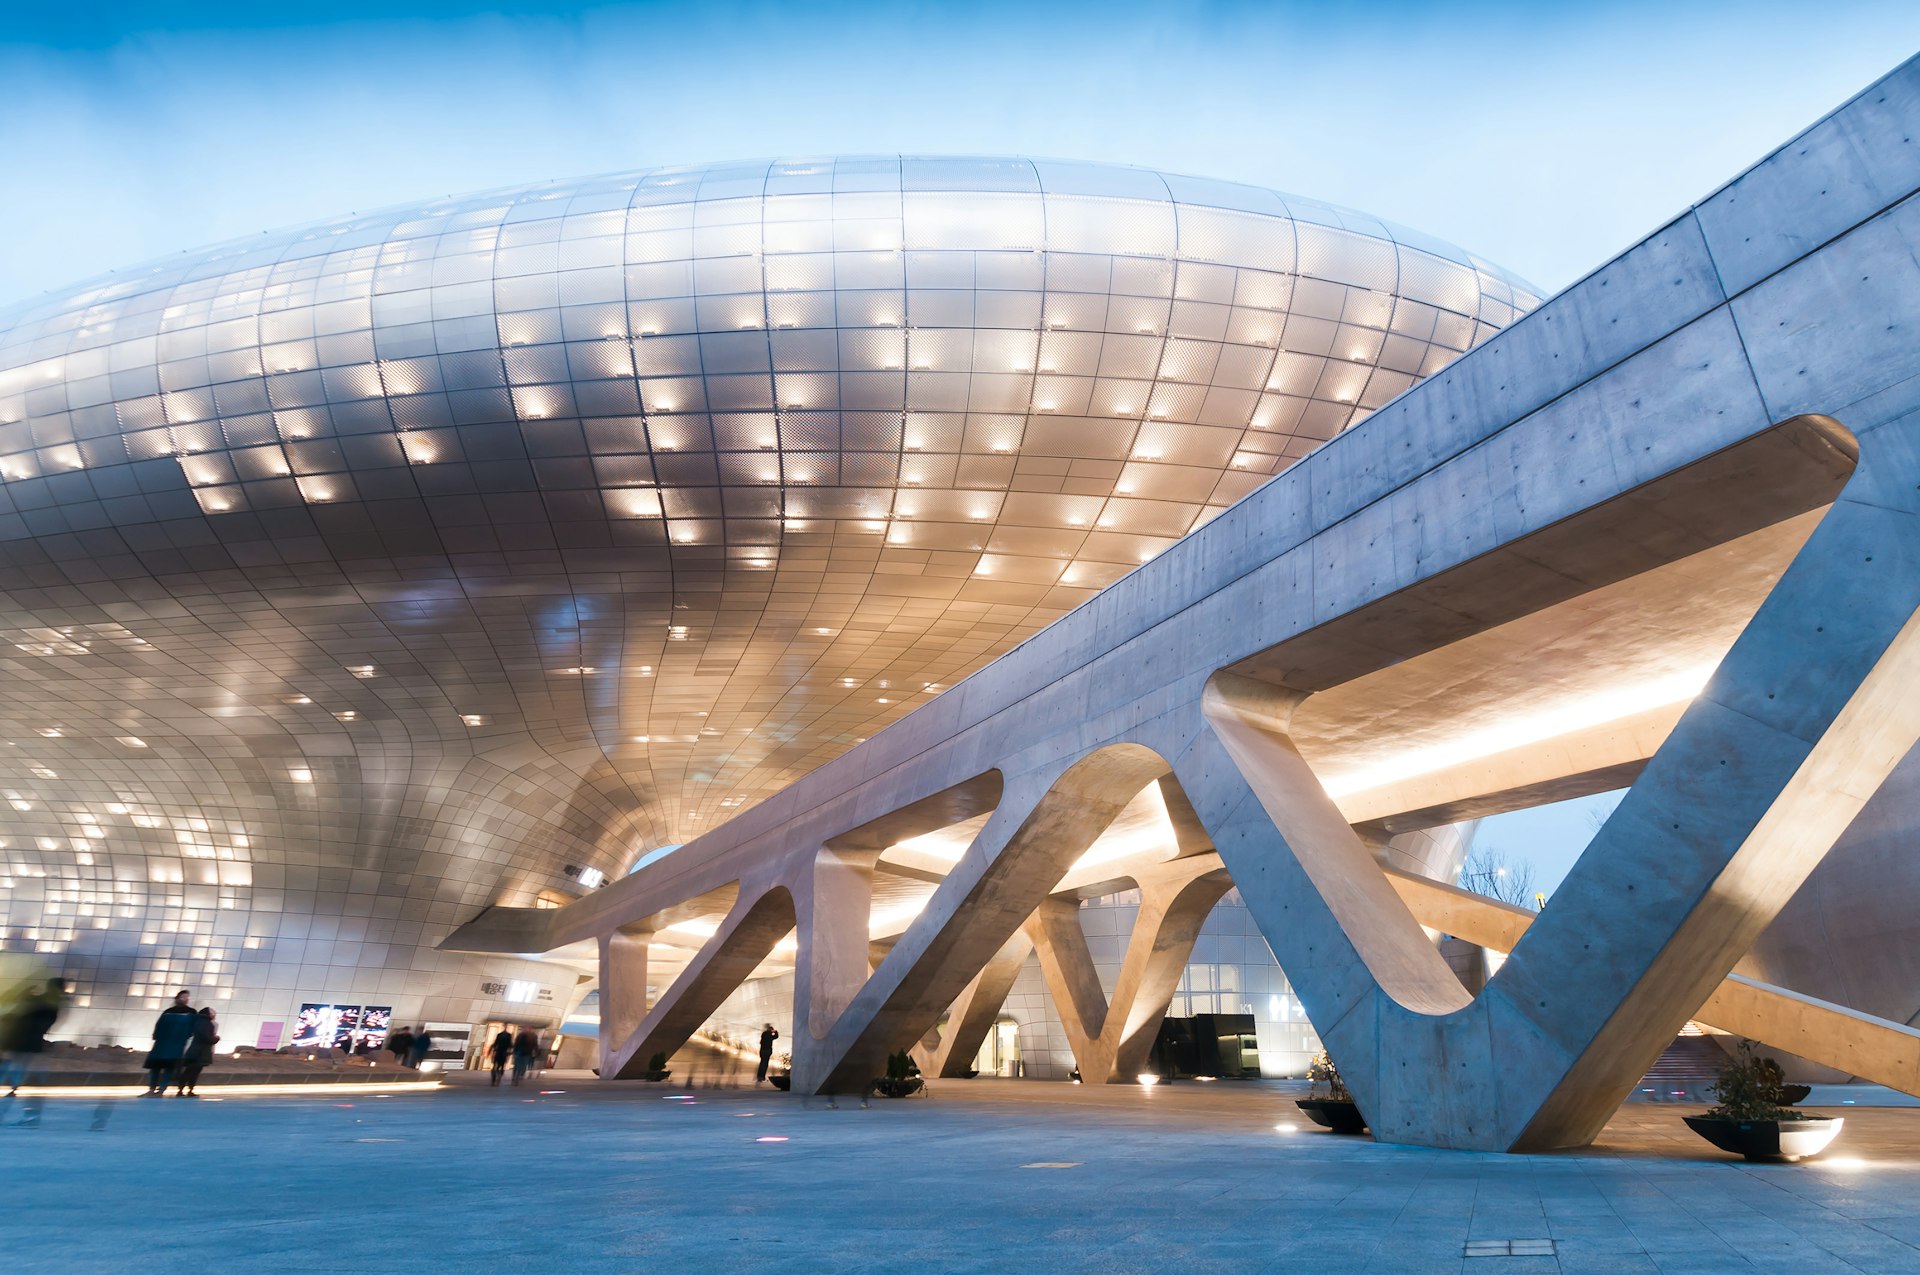 The modern architecture of Dongdaemun Design Plaza at night